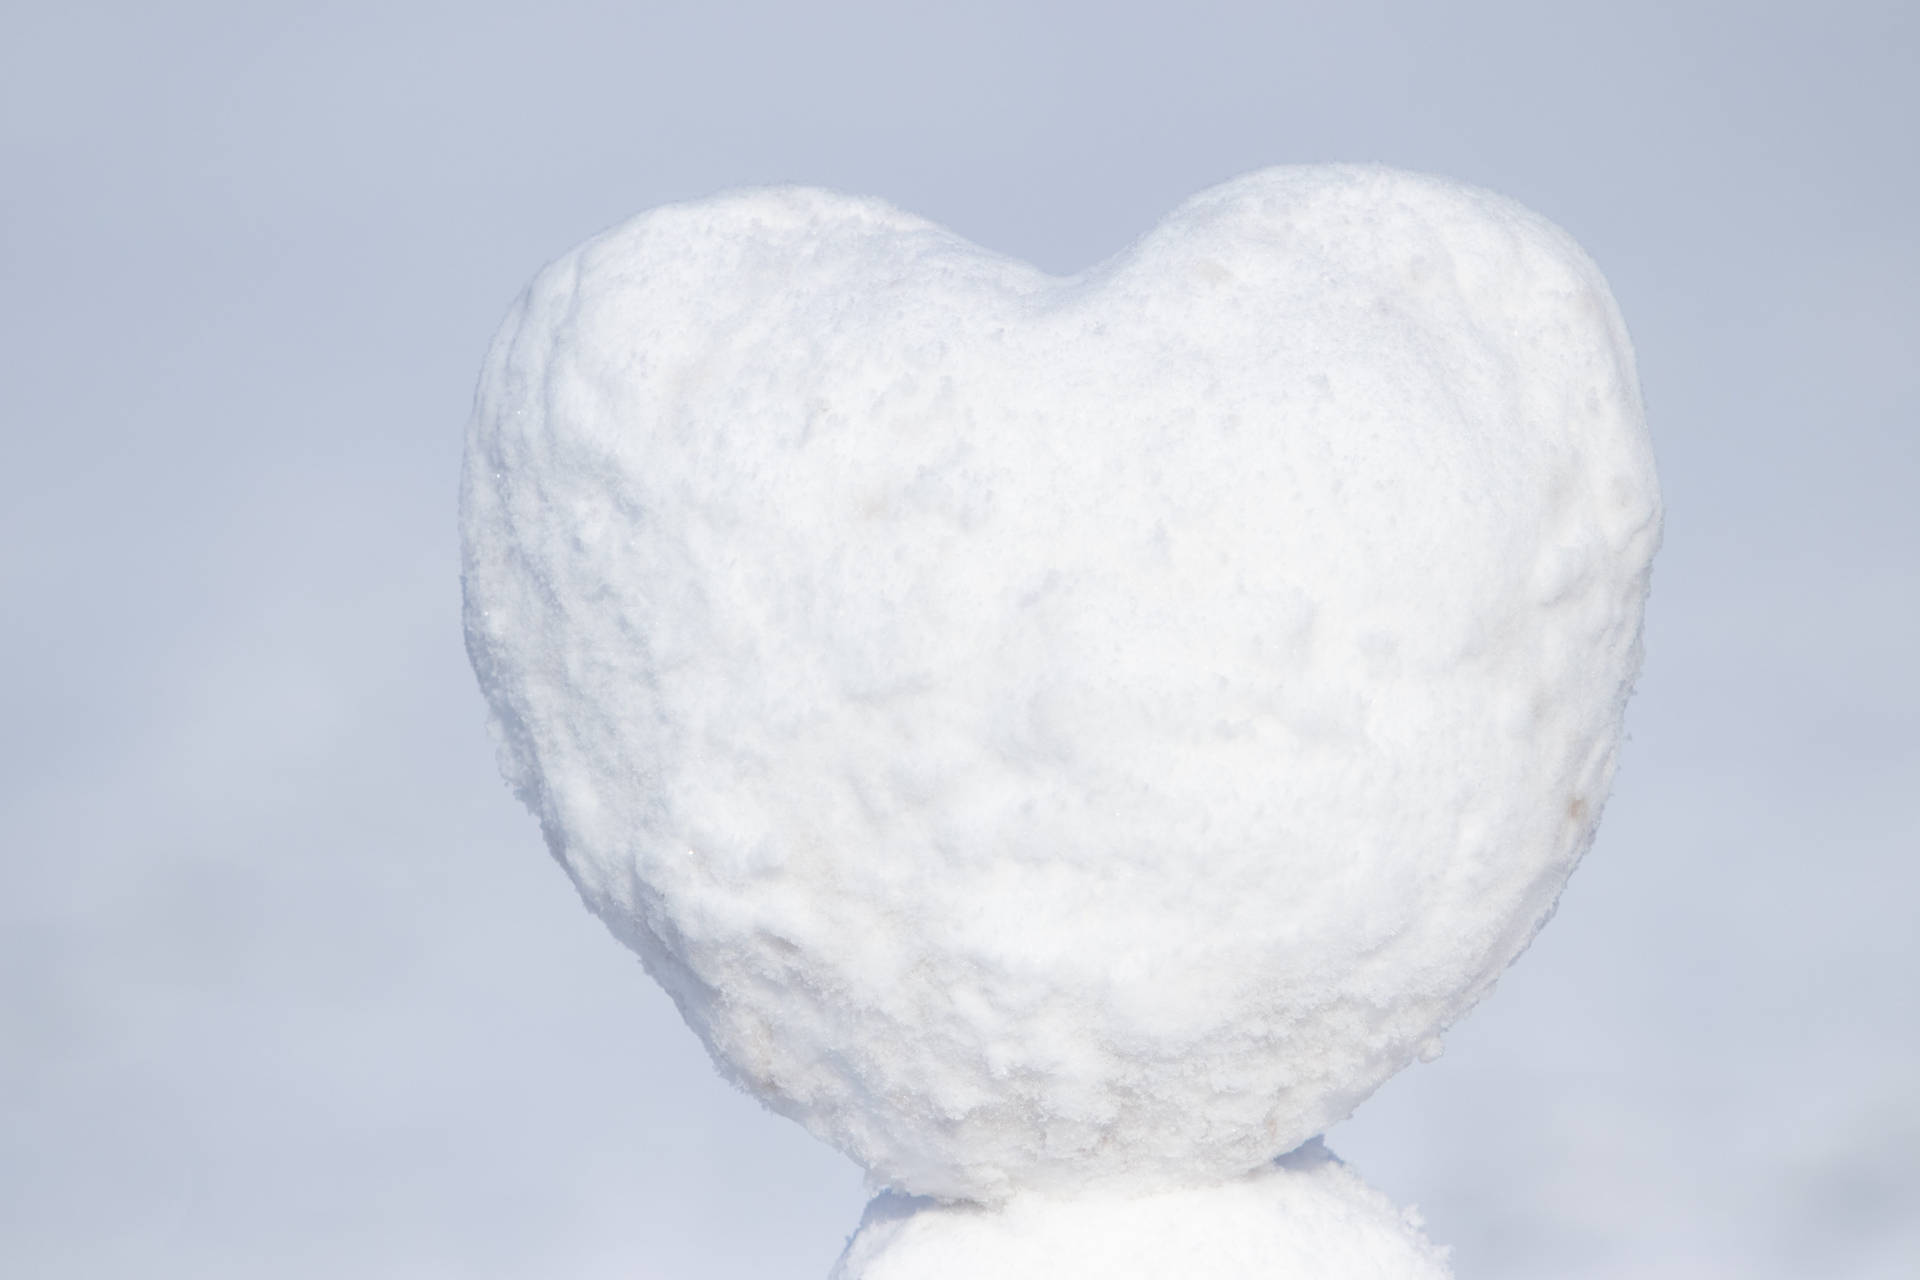 Pure White Heart-shaped Snow Background